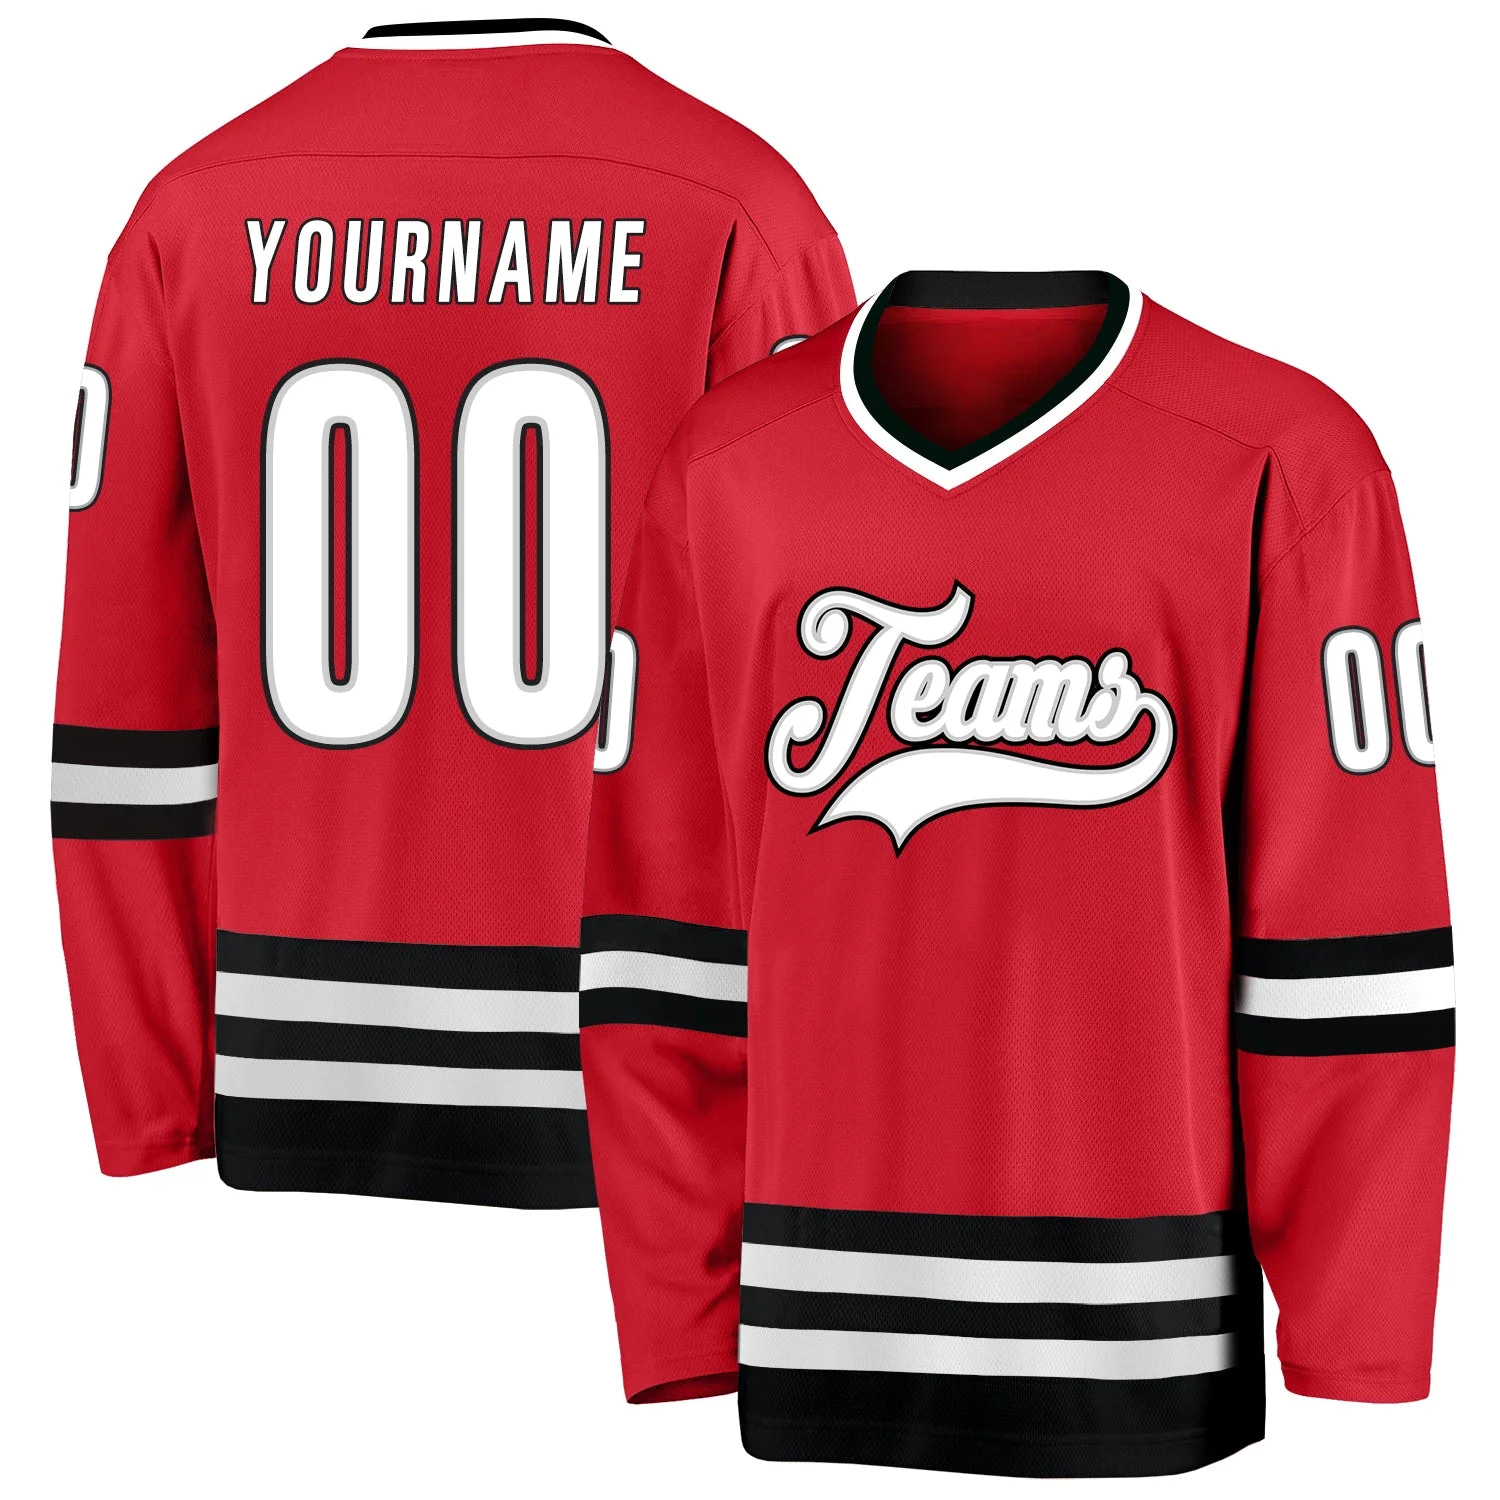 Stitched And Print Red White-black Hockey Jersey Custom